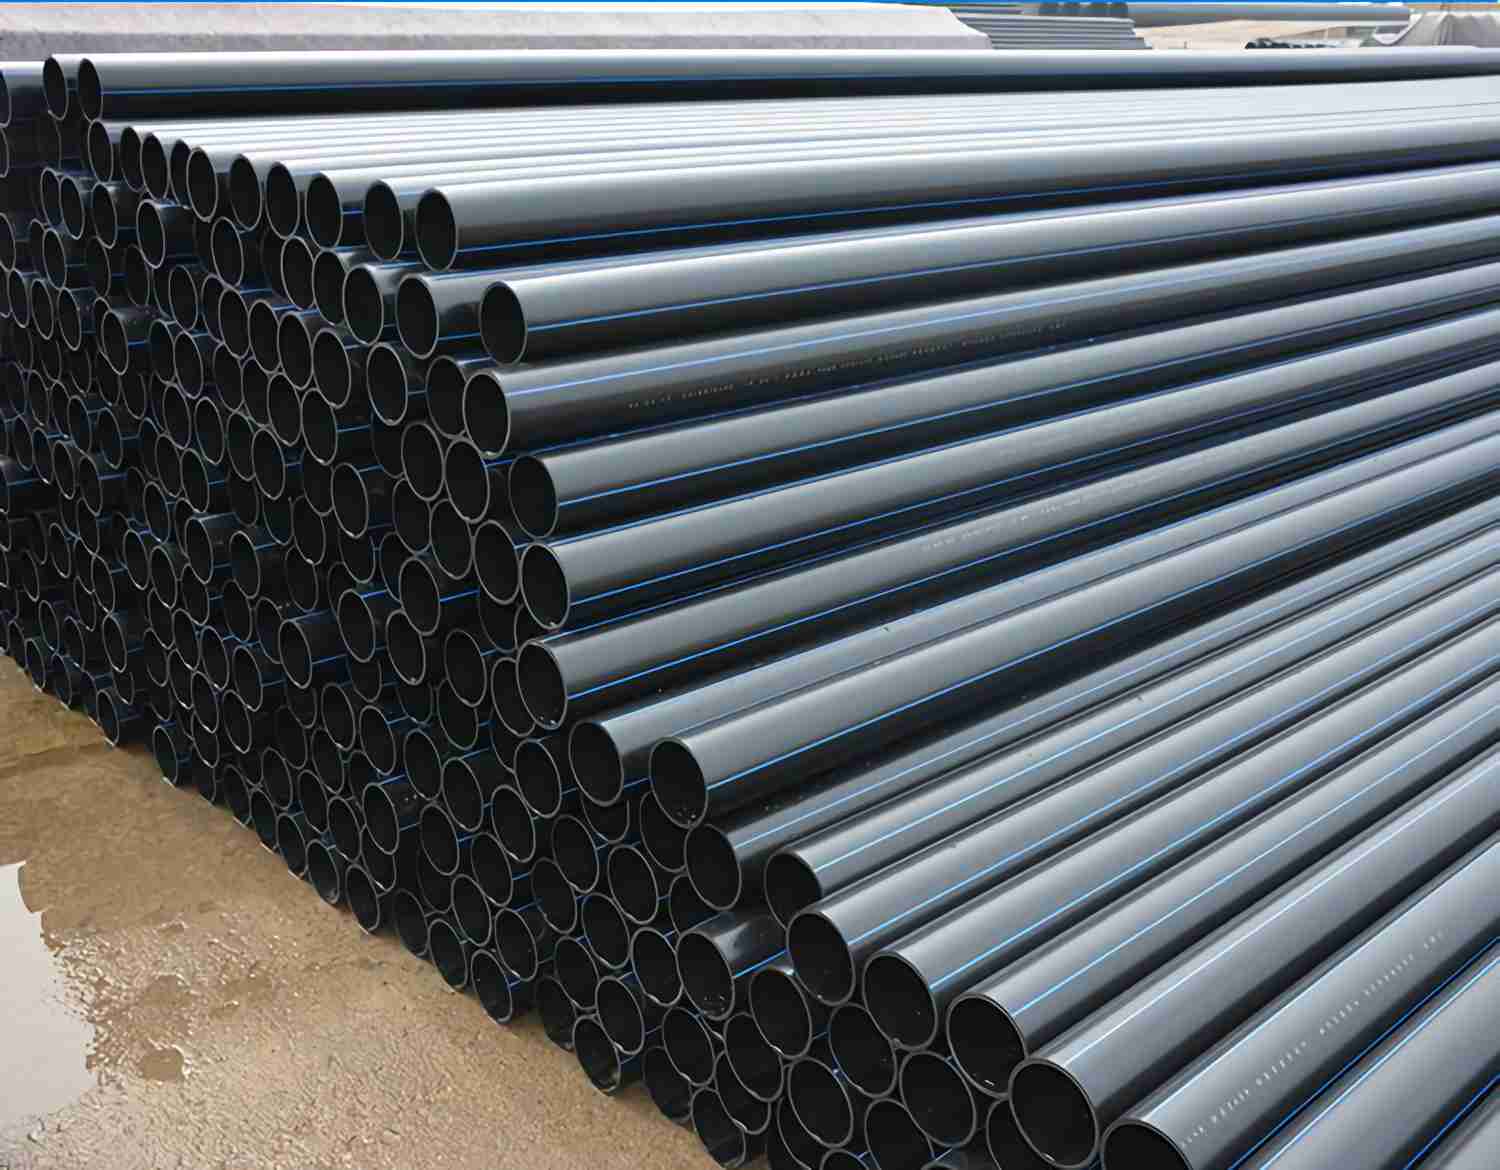 HDPE Water Supply Pipes: Reliable Solutions for Modern Infrastructure - News - 1